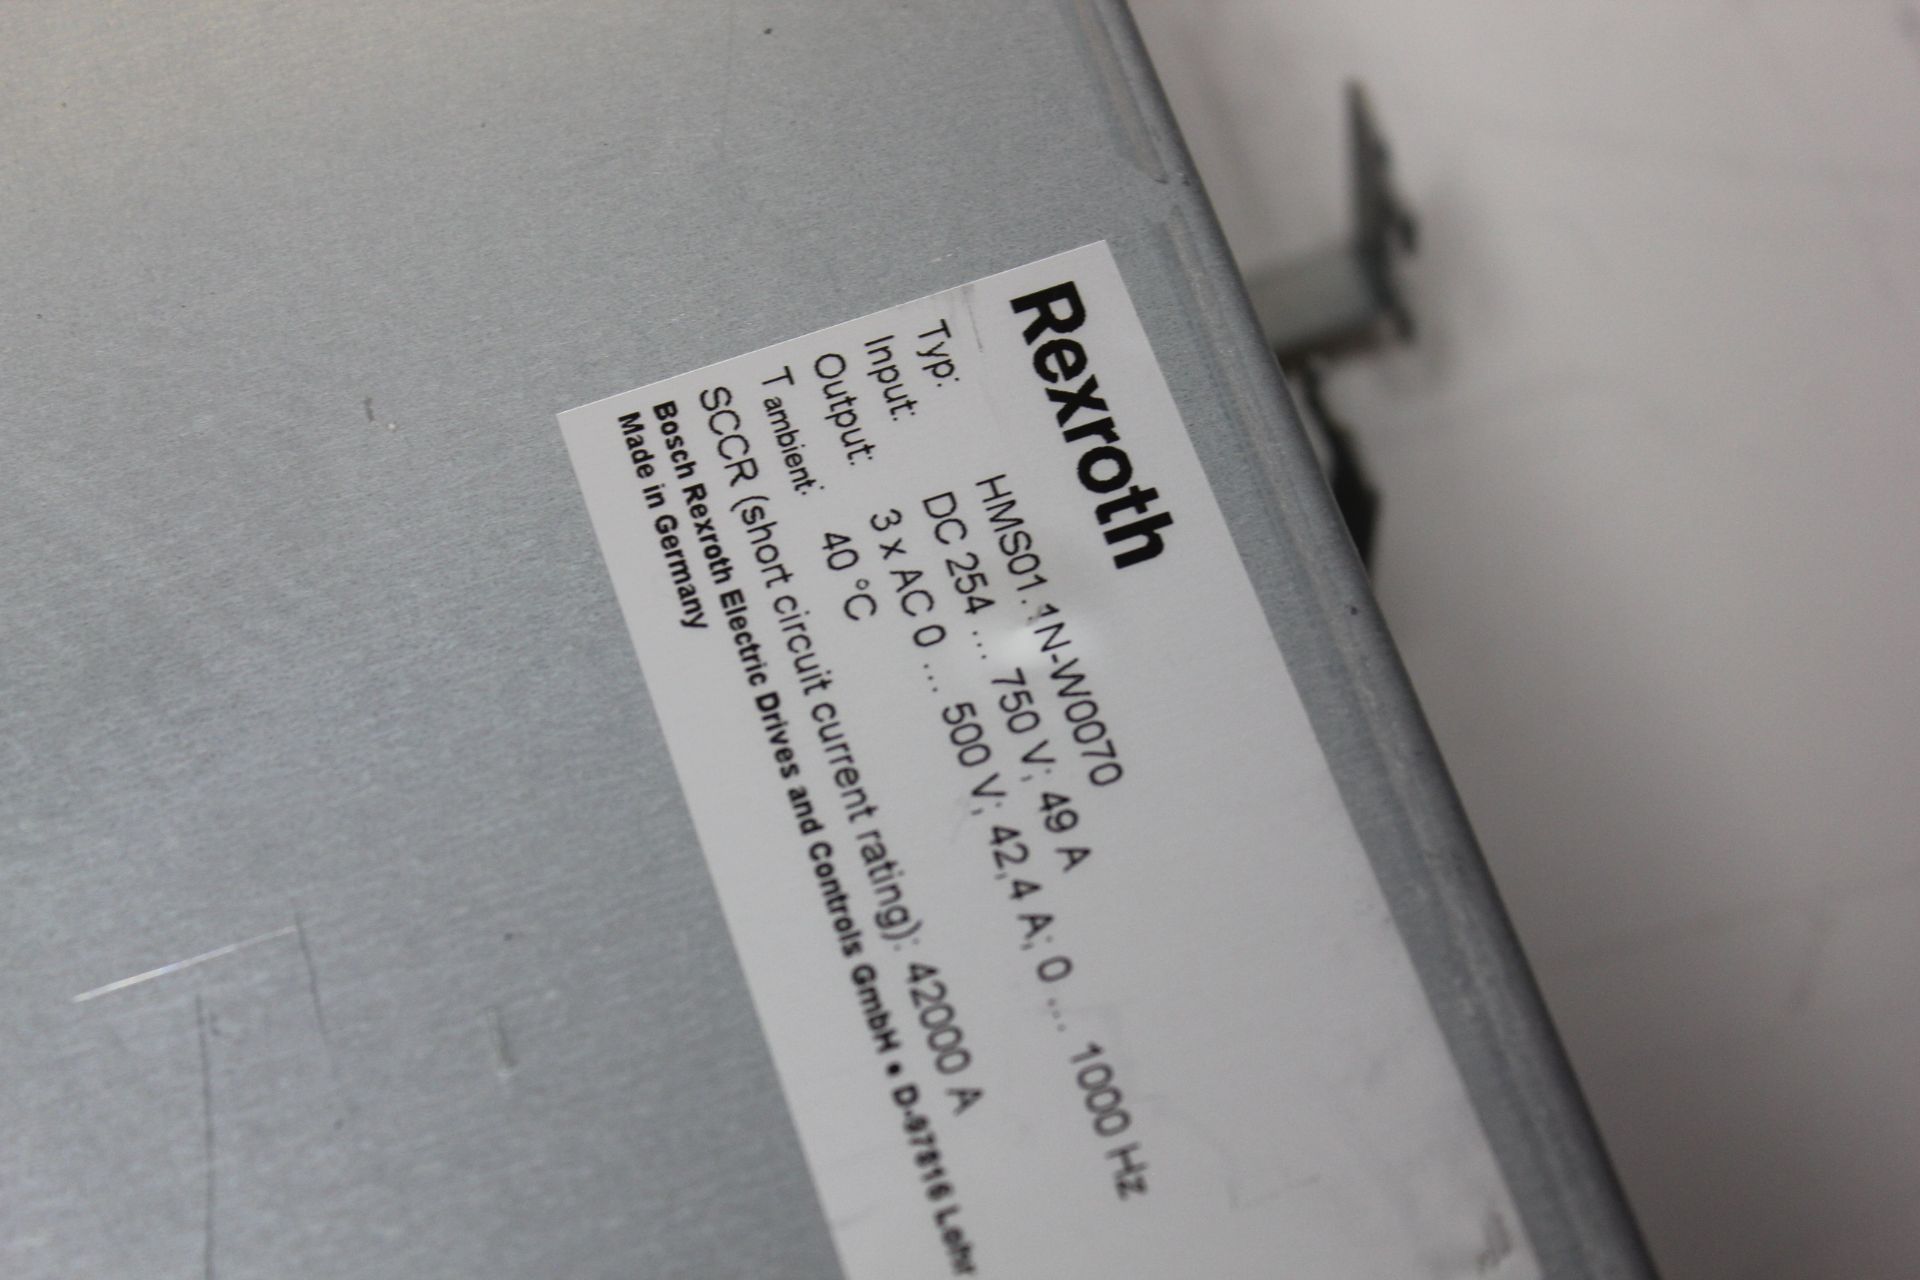 REXROTH INDRADRIVE M SINGLE AXIS INVERTER WITH SERCOS MODULE - Image 6 of 7